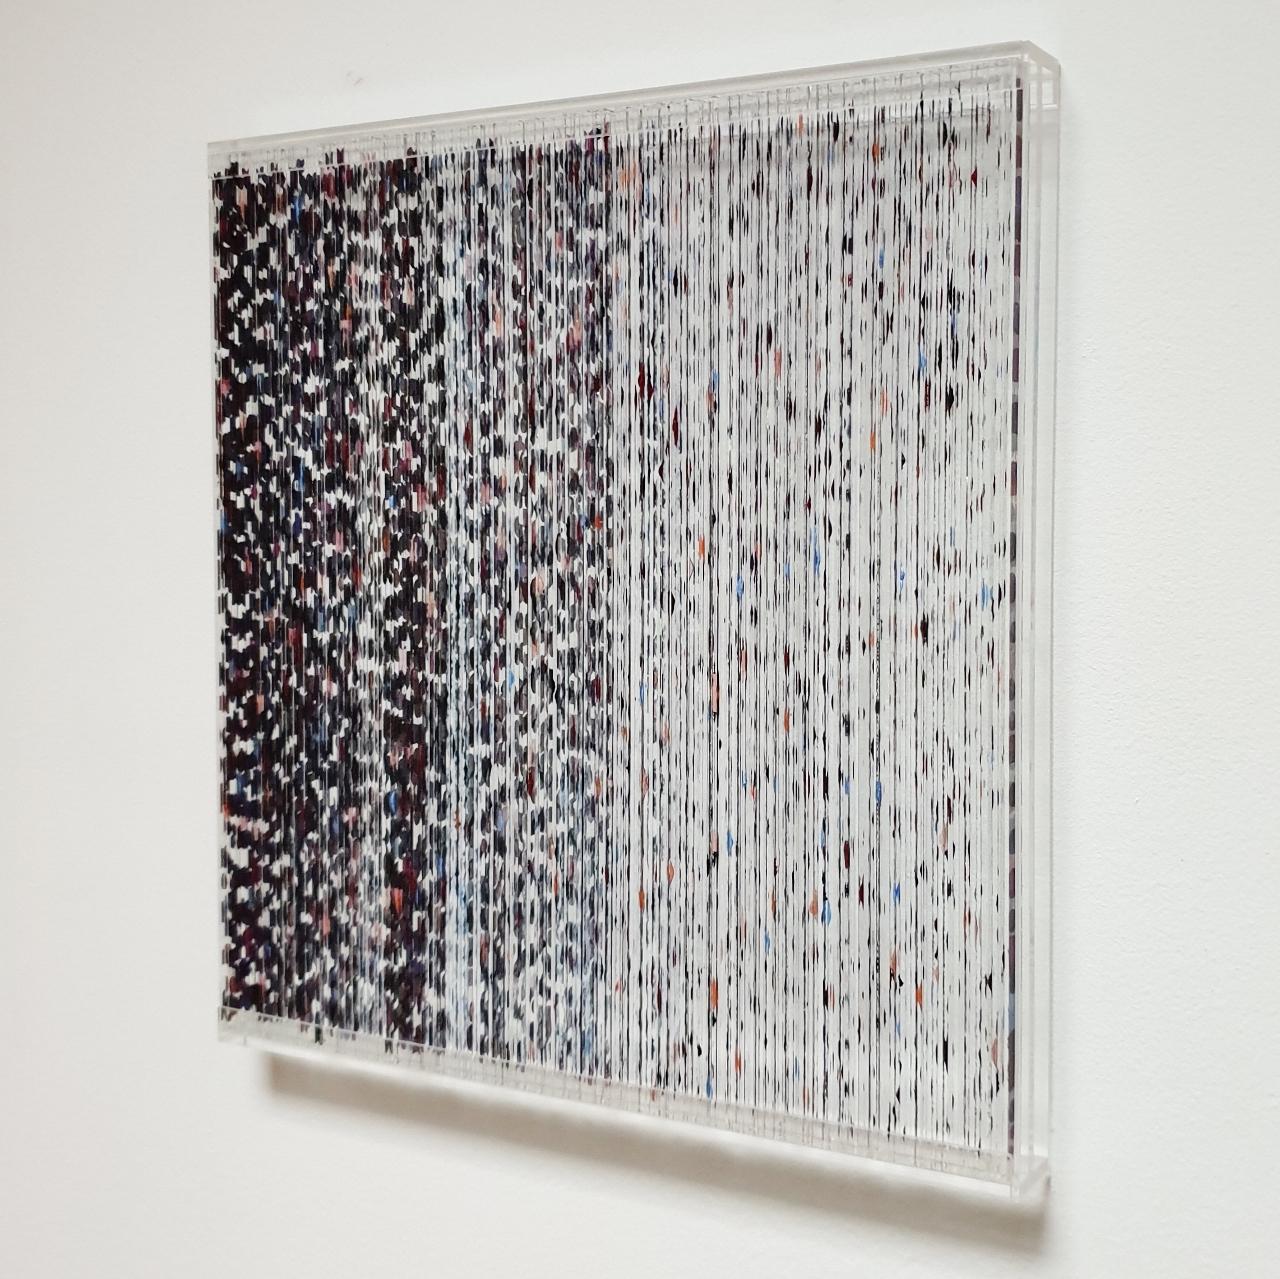 Farbenlichthaut no. 153 is a contemporary modern organic sculpture painting relief by German artist Freddie Michael Soethout. The relief is made from dozens of hand-cut two millimeter thick glass strips covered with a dotted organic pattern of